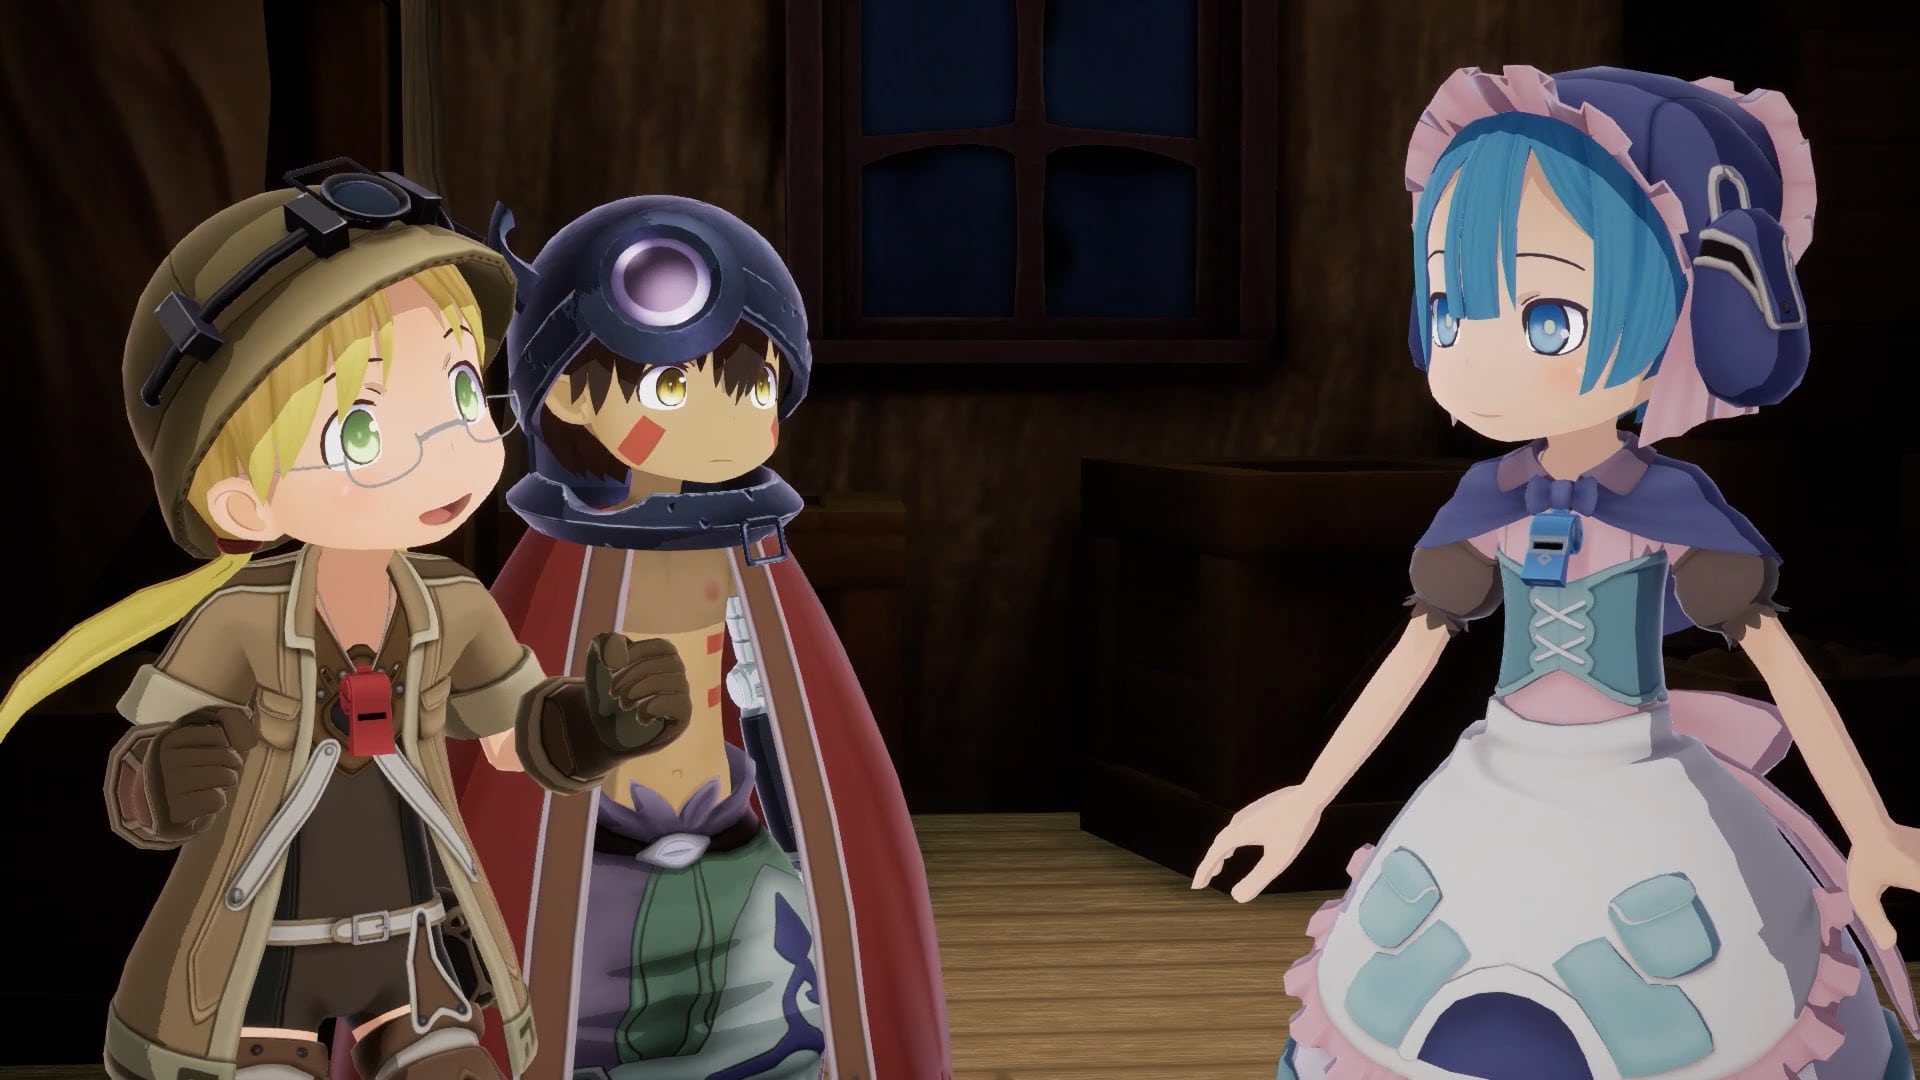 Made in Abyss: Binary Star Falling into Darkness Review - Cave